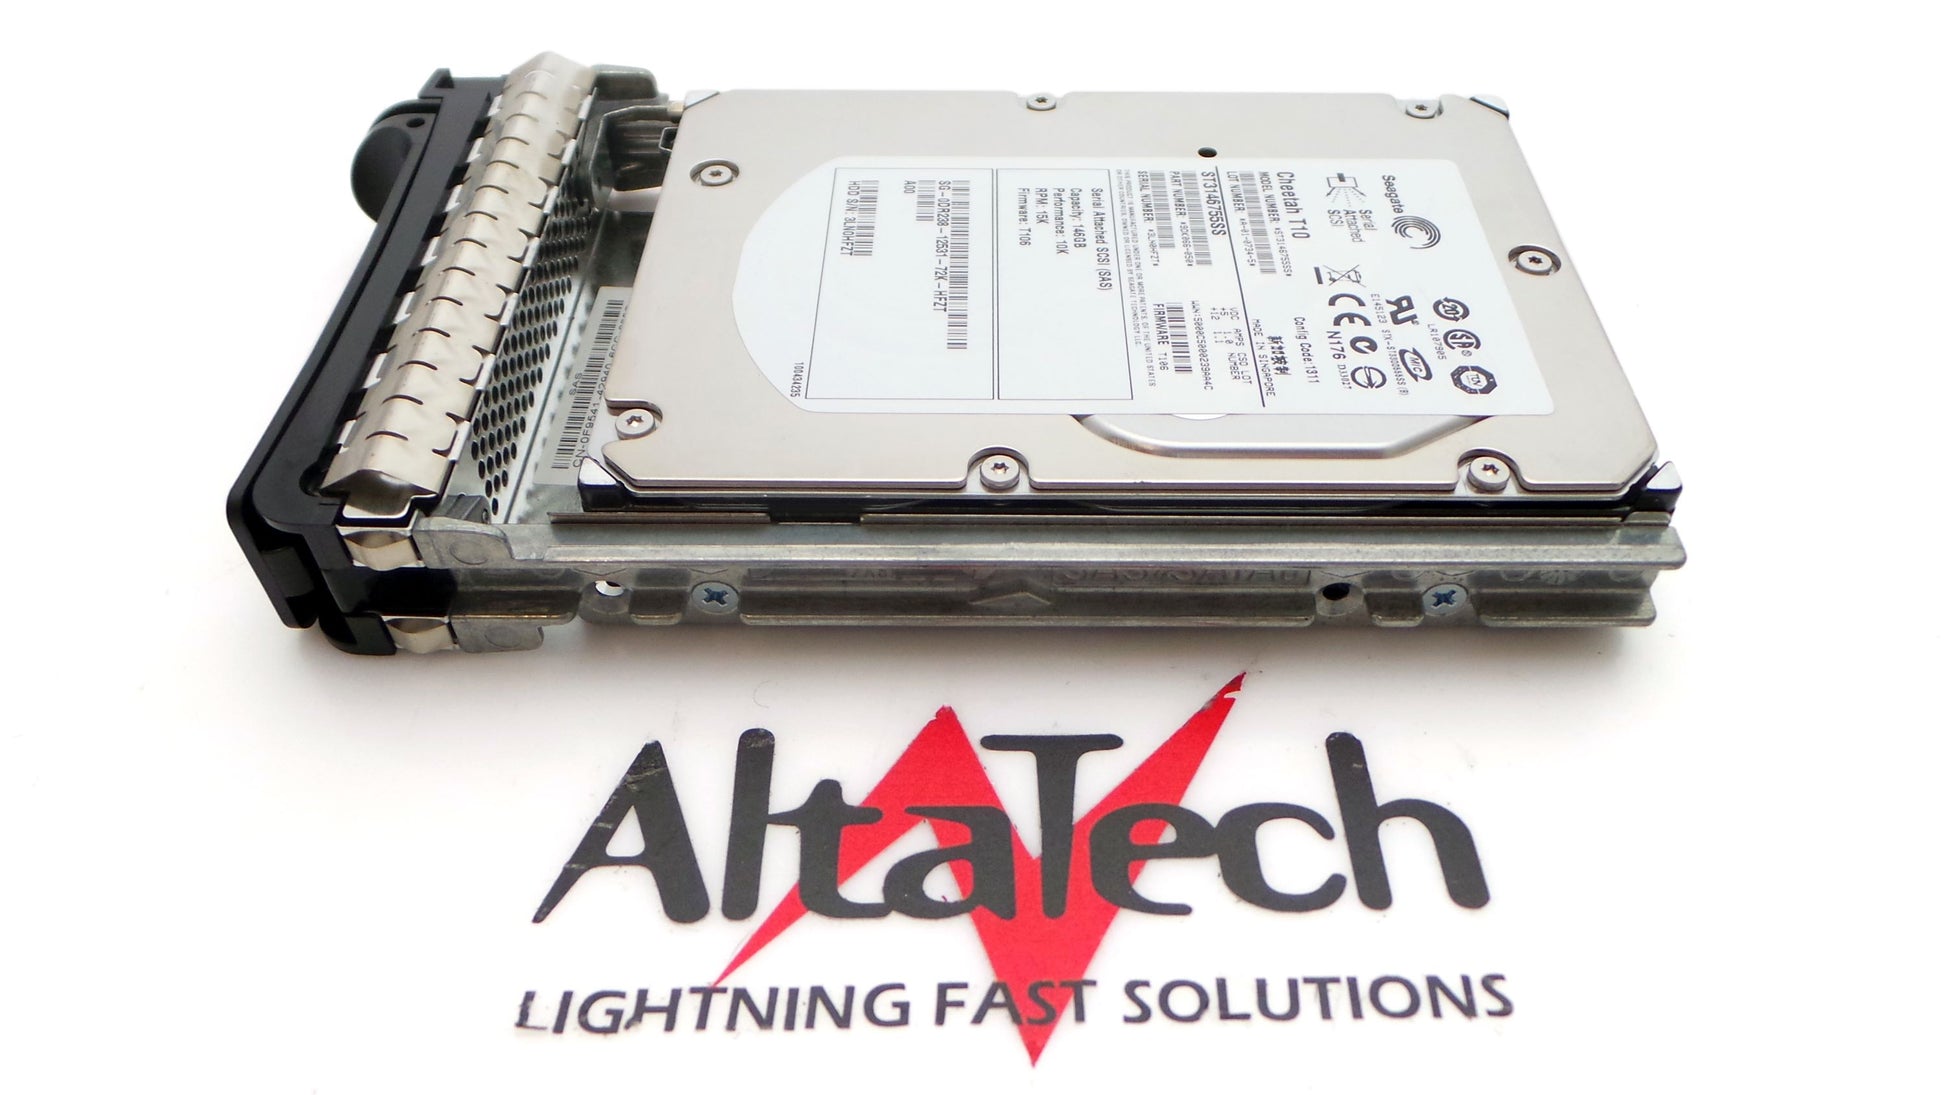 Dell DR238 146GB SAS LFF Hard Disk Drive for PE2950, Used